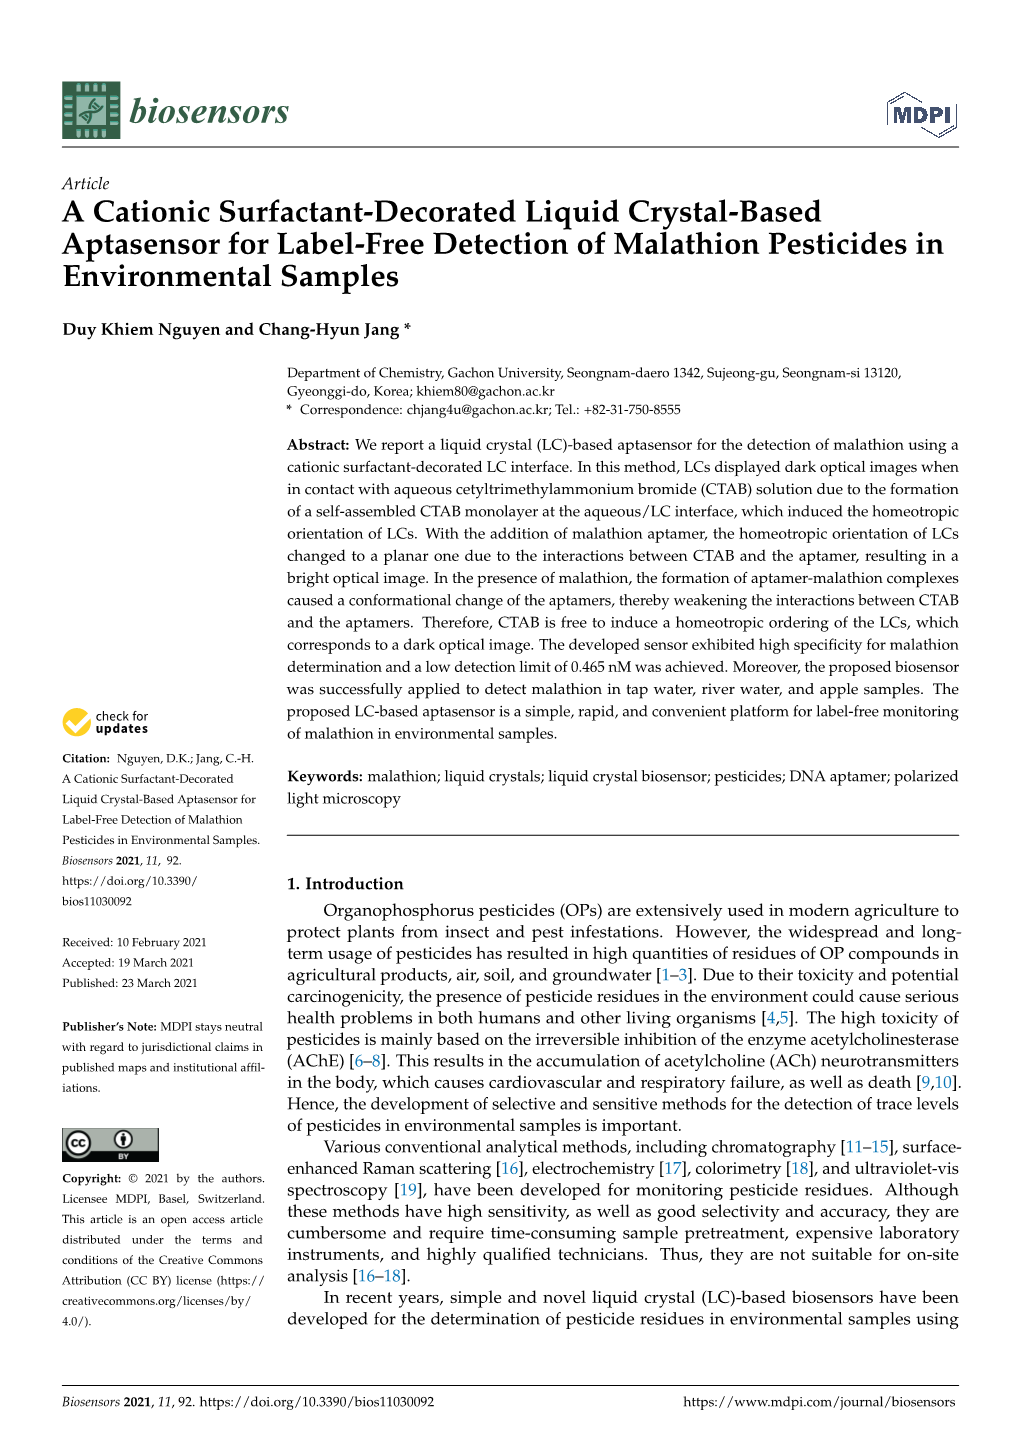 A Cationic Surfactant-Decorated Liquid Crystal-Based Aptasensor for Label-Free Detection of Malathion Pesticides in Environmental Samples